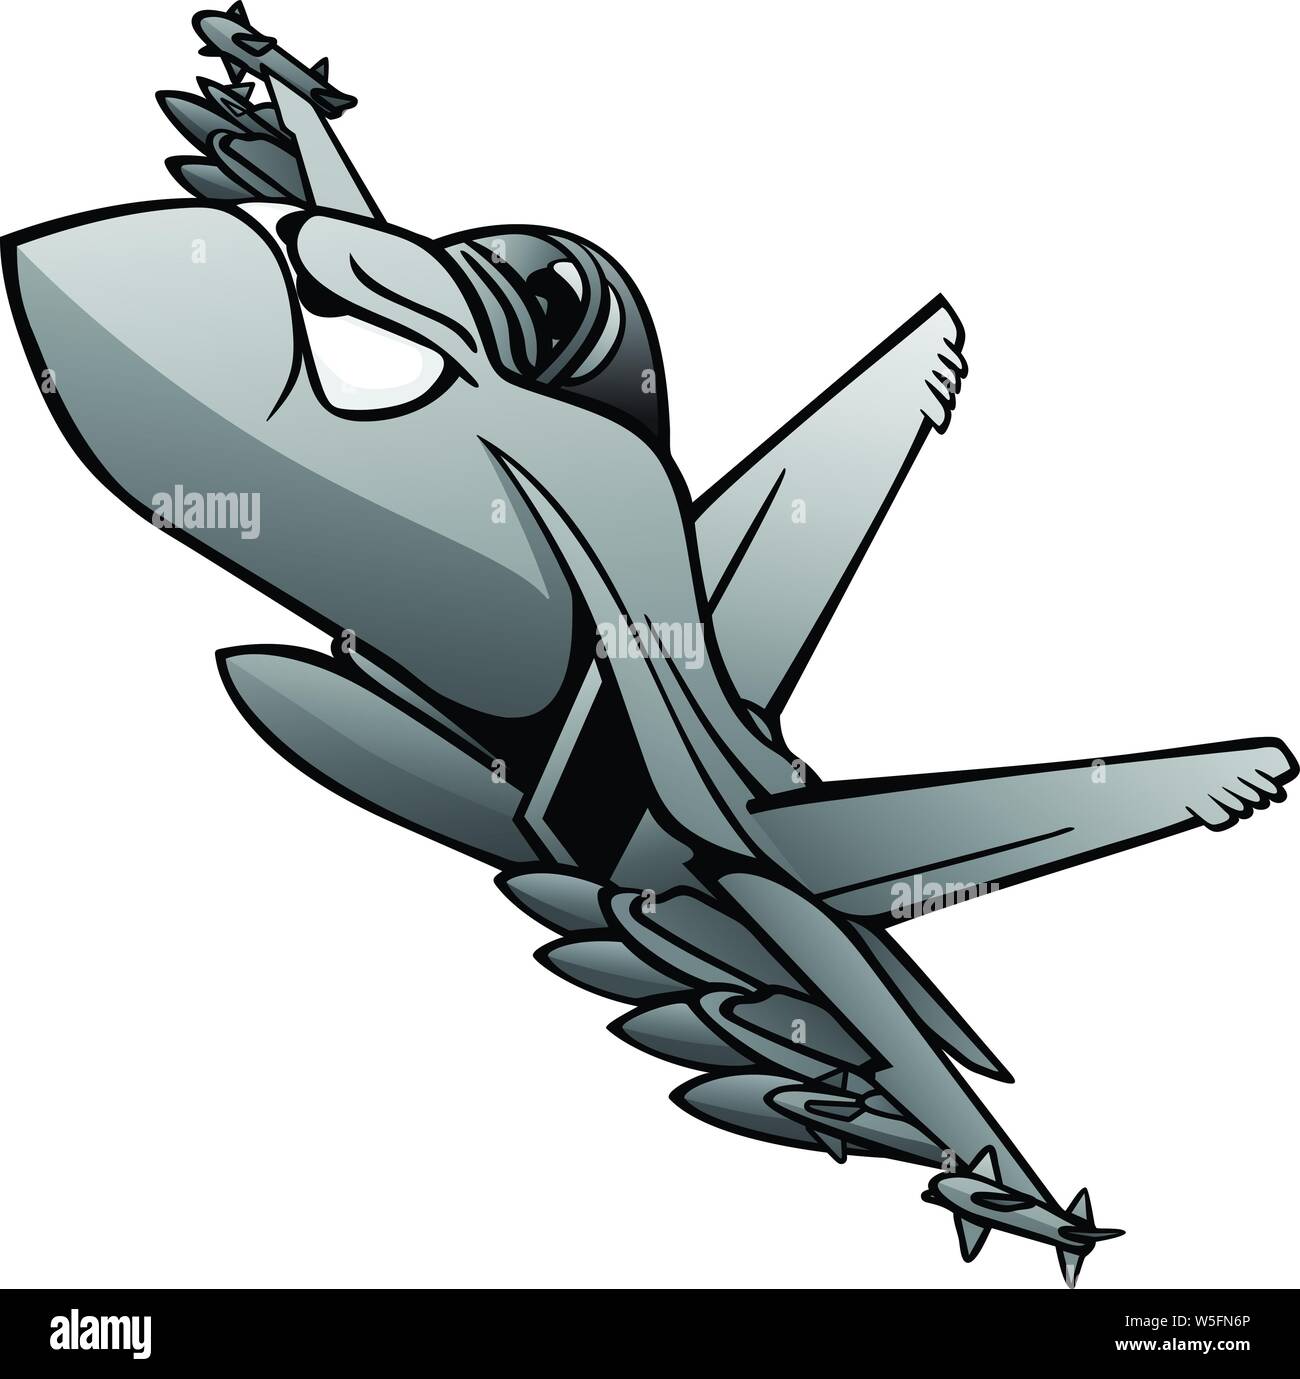 Military Fighter Attack Jet Airplane Cartoon Vector Illustration Stock Vector